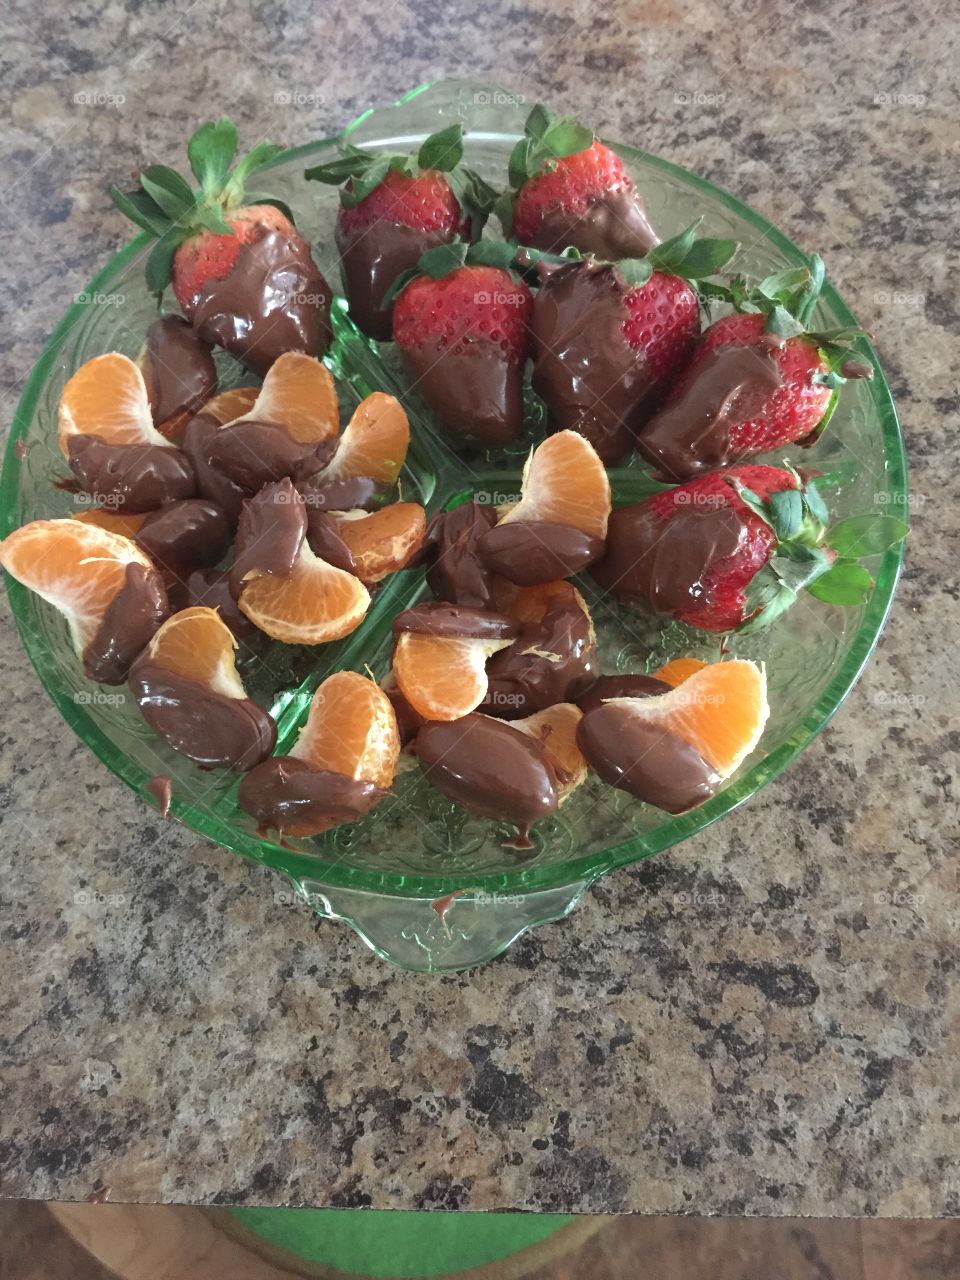 Yum chocolate goes with anything fruity especially cuties and strawberries!